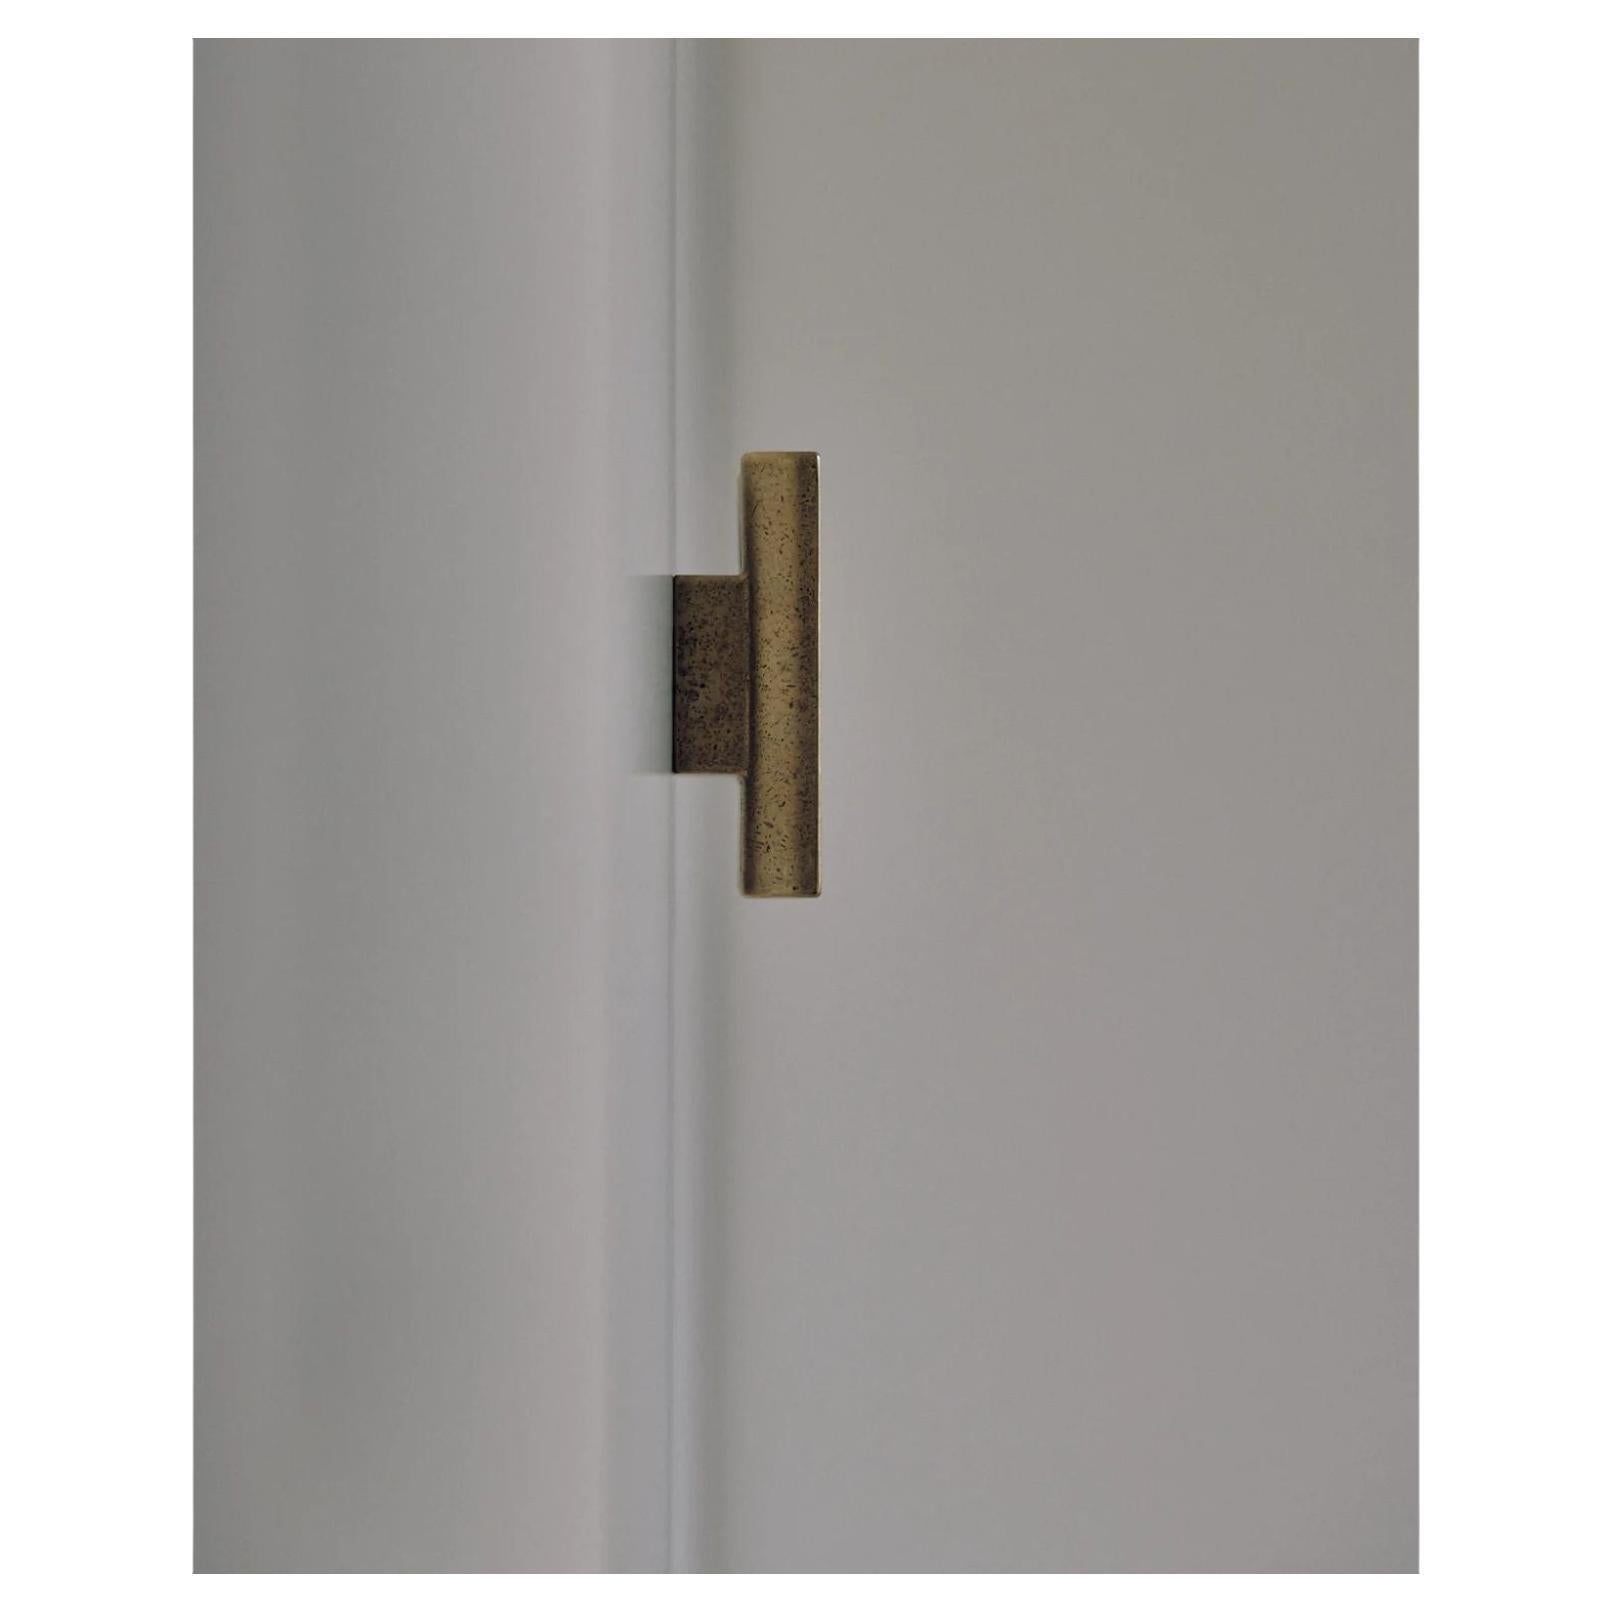 ADT Handle Brass by Henry Wilson
Dimensions: D 3 x W 9 x H 1.8 cm
Materials: Brass

This versatile handle can be used for cabinetry, sliding doors and sash windows. Can be specified threaded or face fixed. Face fix lead time 4 weeks.
Each piece